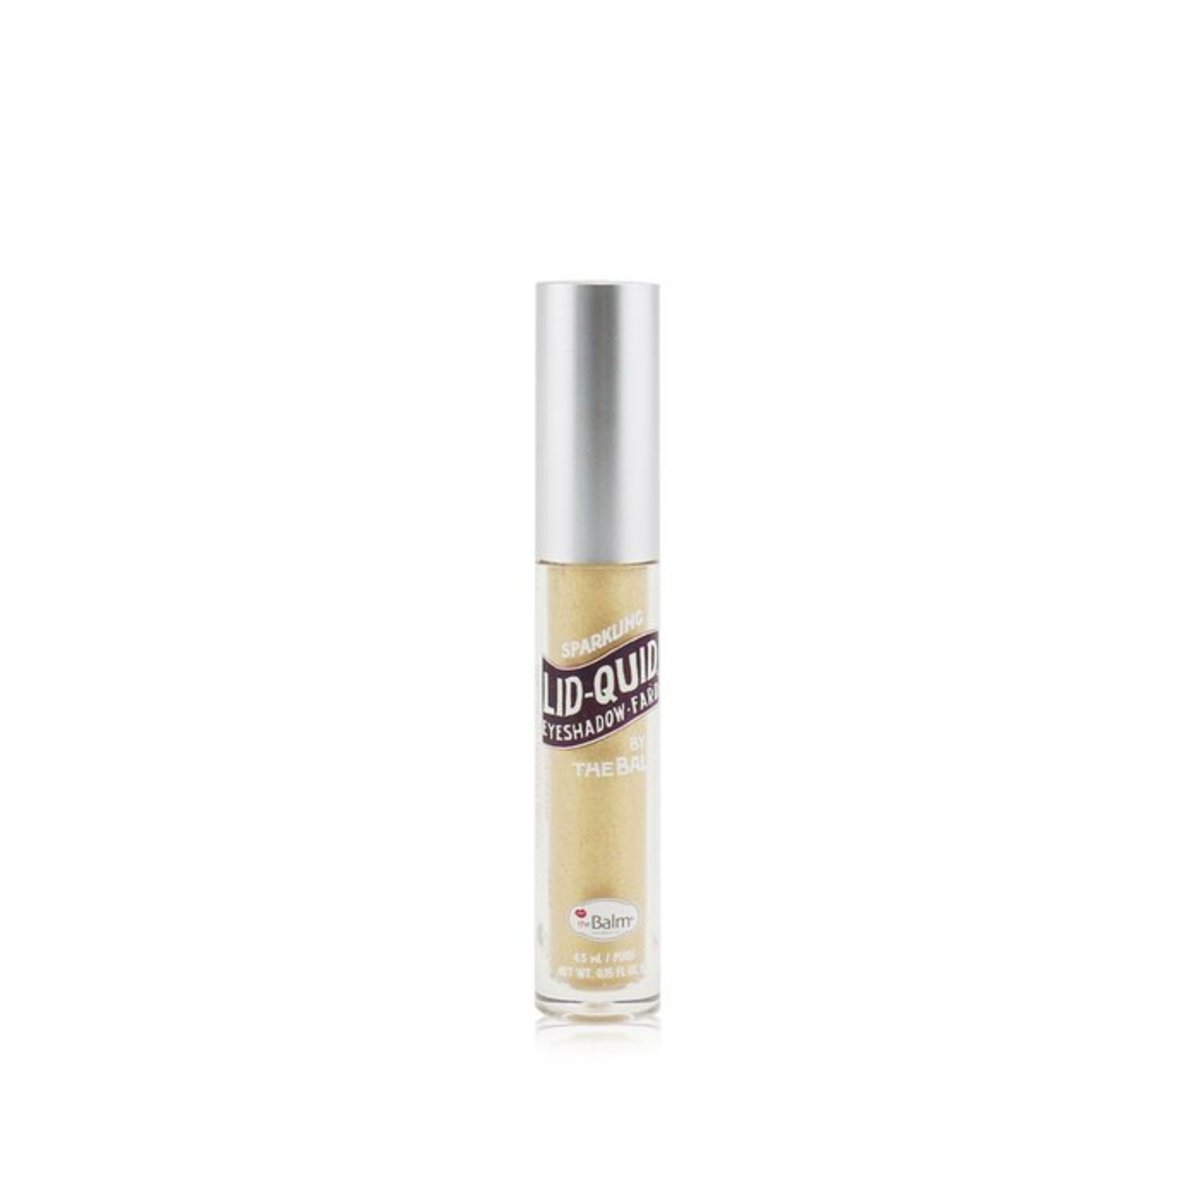 Lid Quid Sparkling Liquid Eyeshadow - # Champagne 4.5ml/0.15oz - [Parallel Import Product]